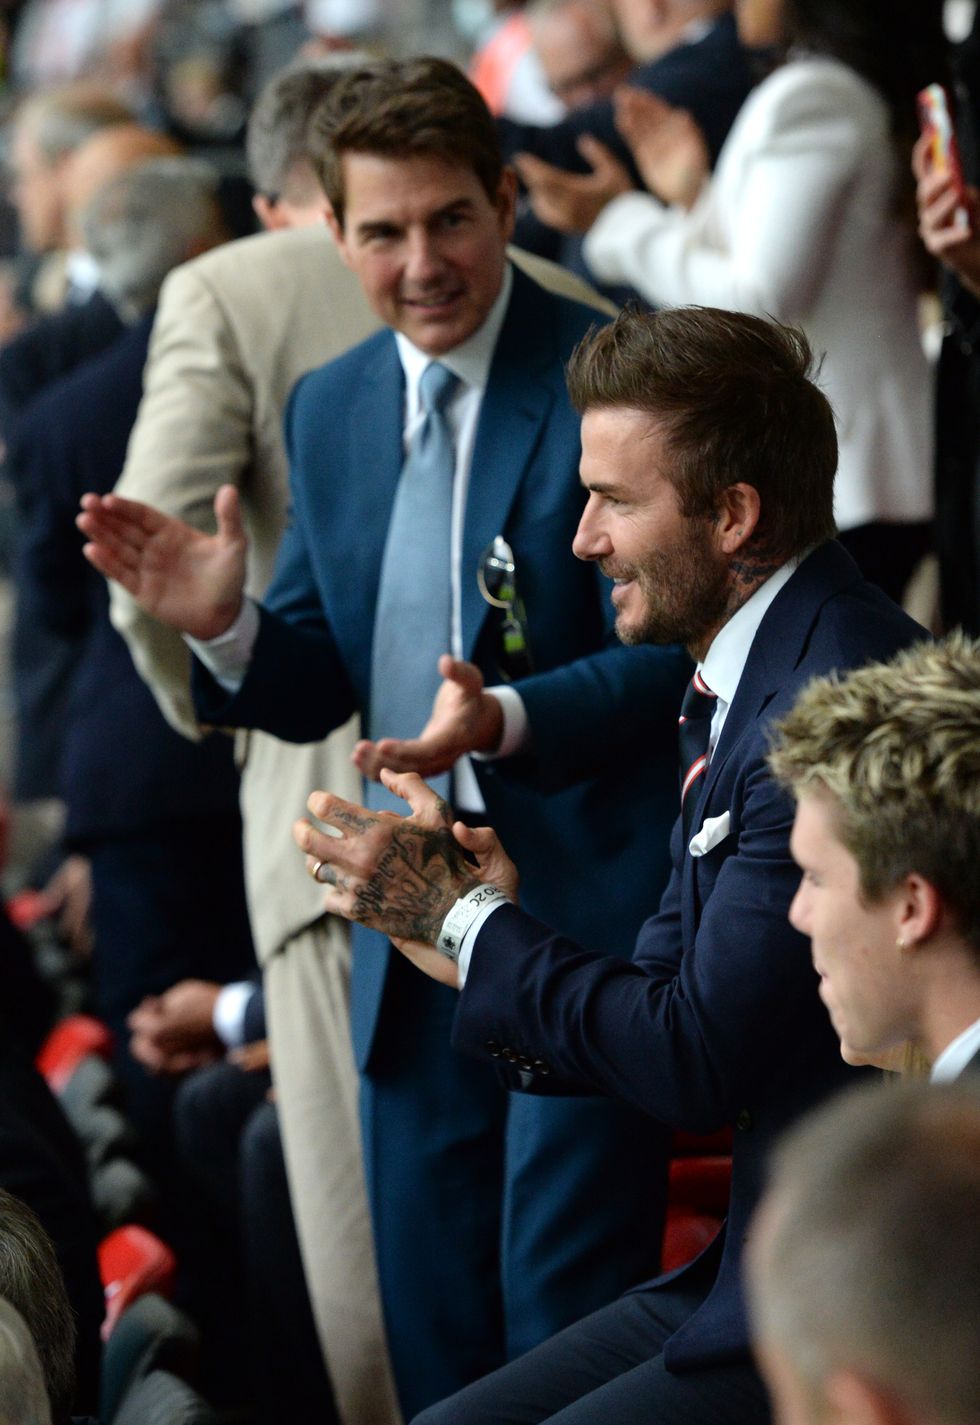 london, england   july 11 former england international david beckham and actor tom cruise applaud prior to during the uefa euro 2020 championship final between italy and england at wembley stadium on july 11, 2021 in london, england photo by eamonn mccormack   uefauefa via getty images